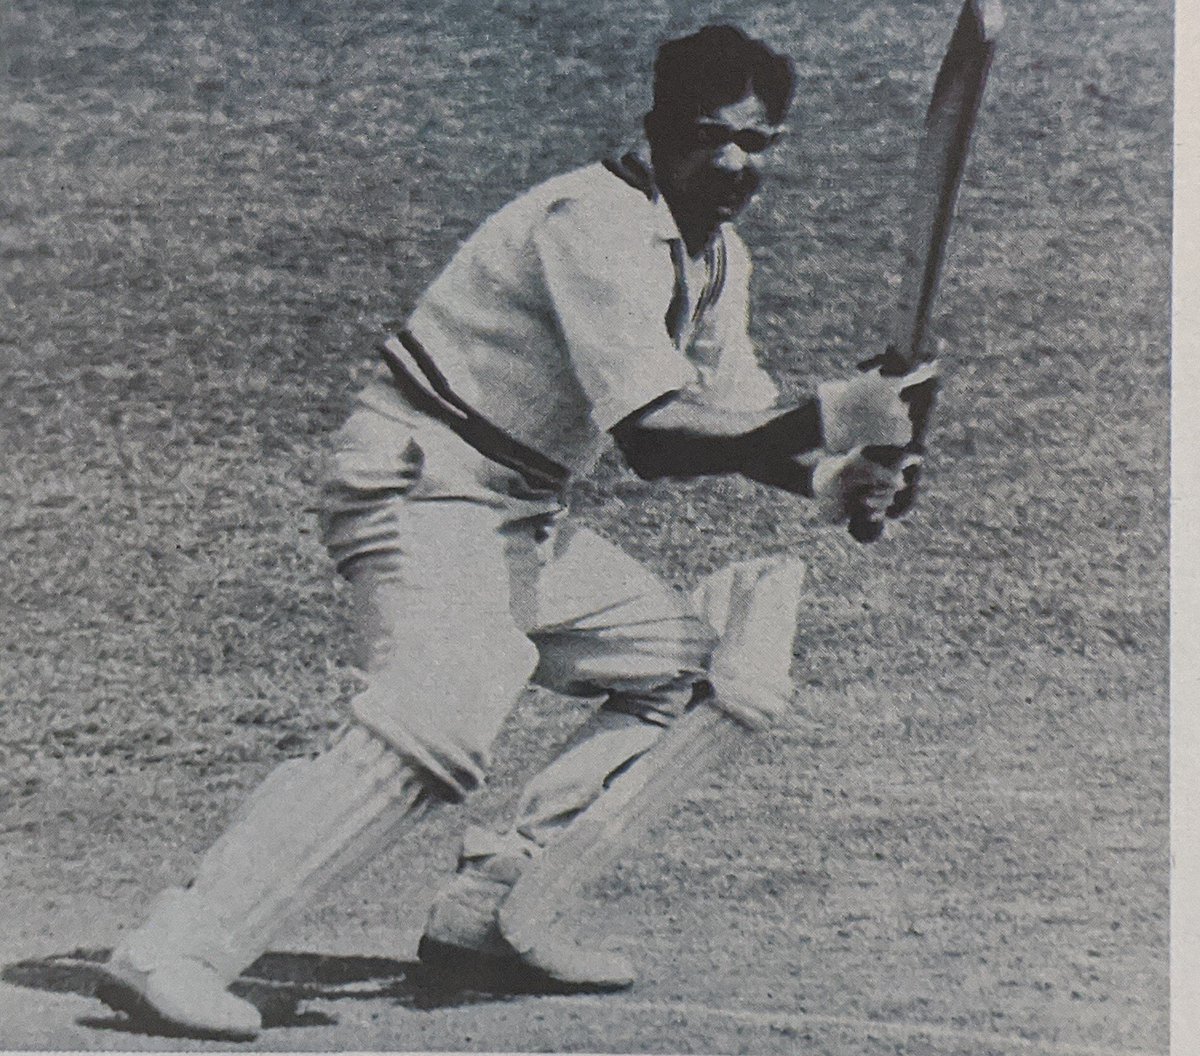  and 7) Vinoo Mankad : 184 Vs Eng, Lords, 1952. Test was known as Mankad's test. He scored 72 & 184 & took a 5fer8) SM Gavaskar : 96 Vs Pak, Bangalore, 1987.  @BishanBedi says SMG batted intelligently. His patience was monumental & took great pride in his technique